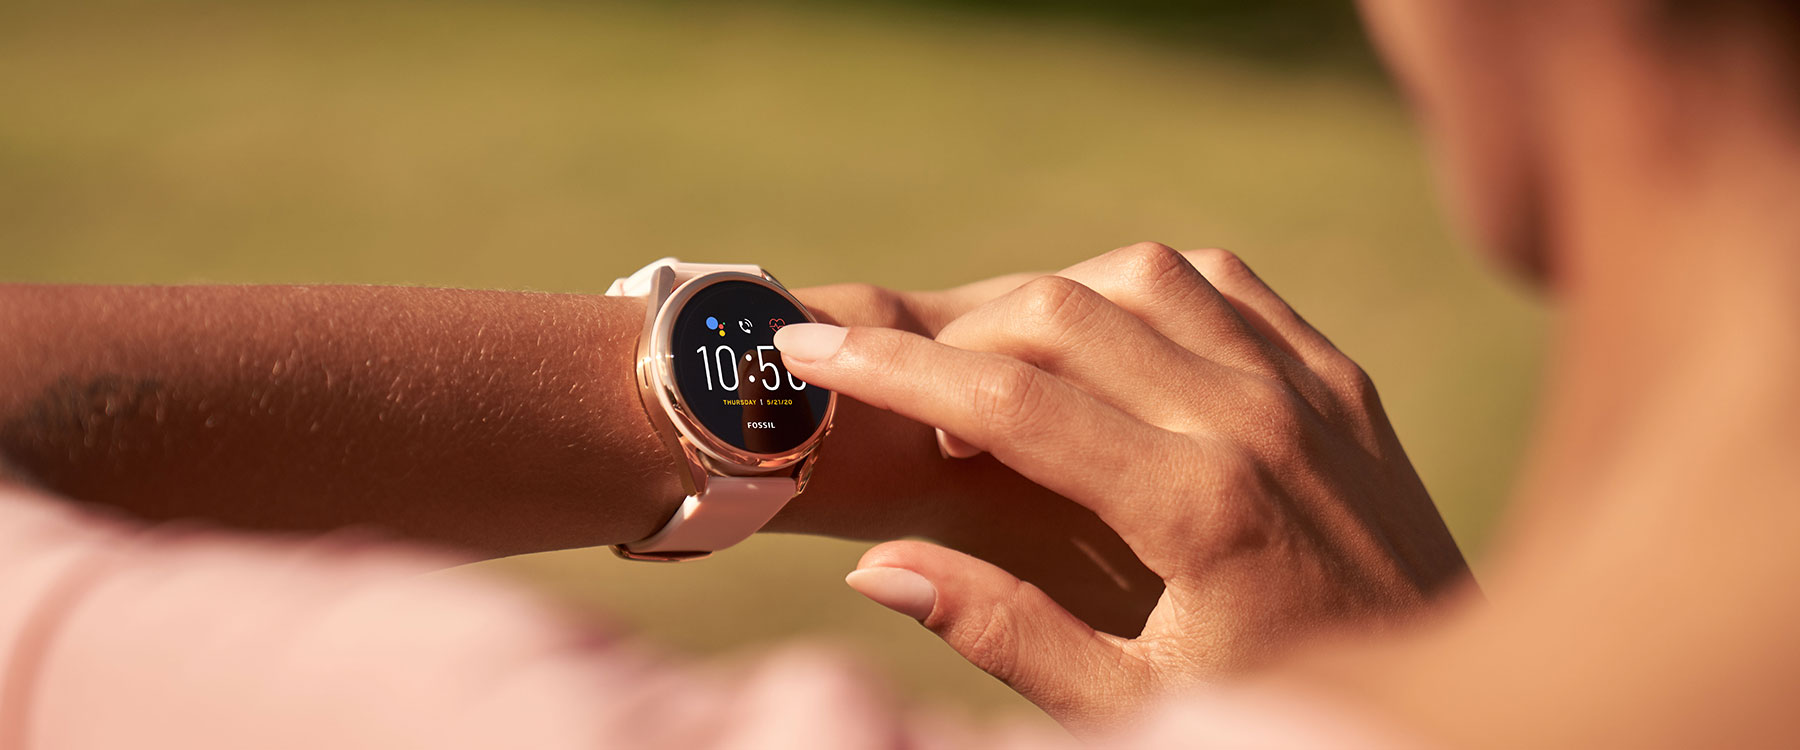 Fossil Launches LTE, Expands Gen 5E to Michael Kors and Hybrid HR to Skagen  | Fossil Group